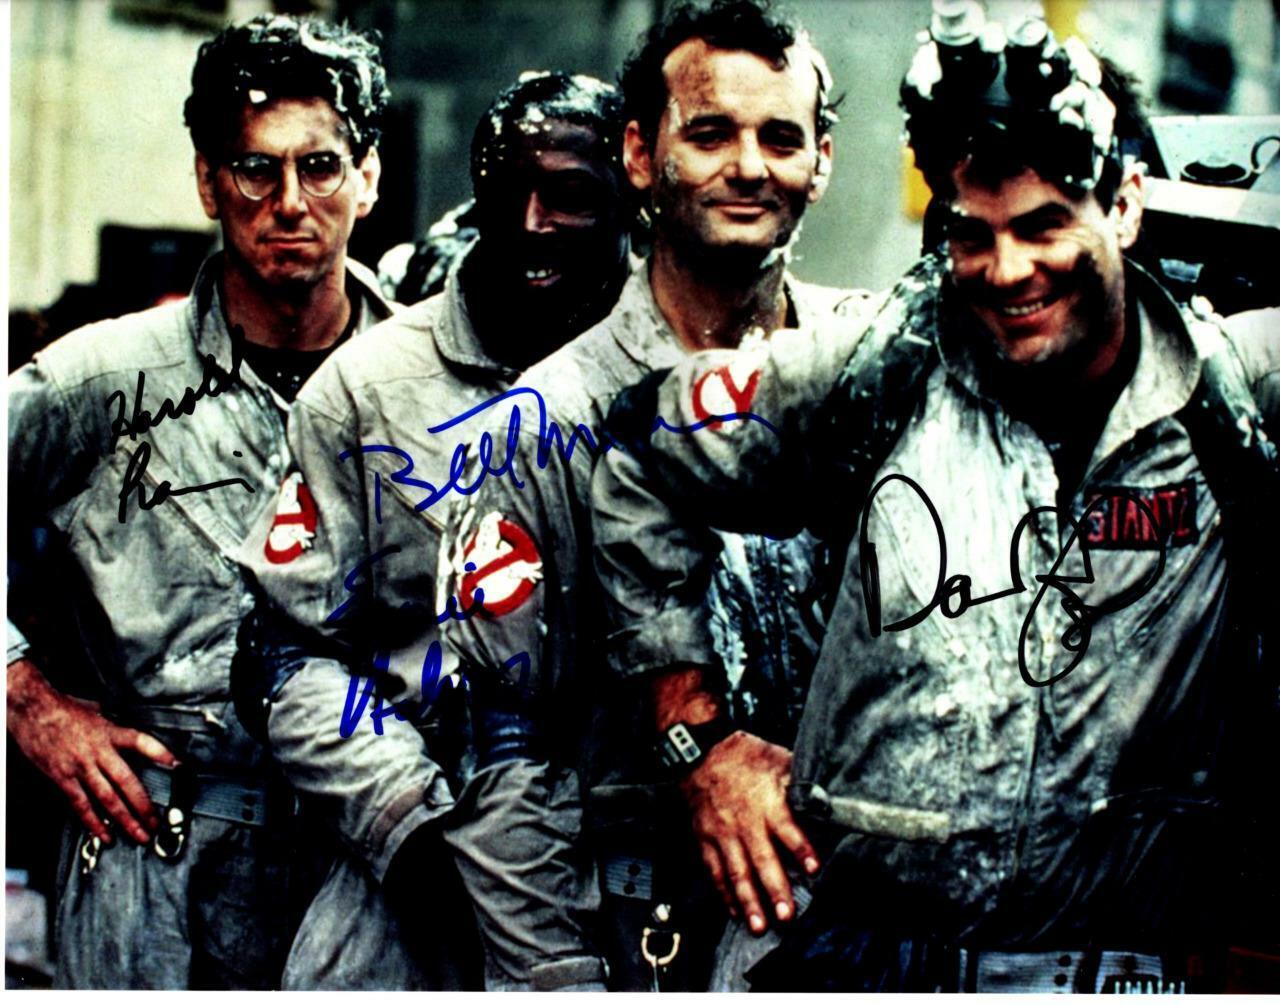 Dan Aykroyd Murray Ramis + 1 signed 11x14 Photo Poster painting and COA autographed Picture nice